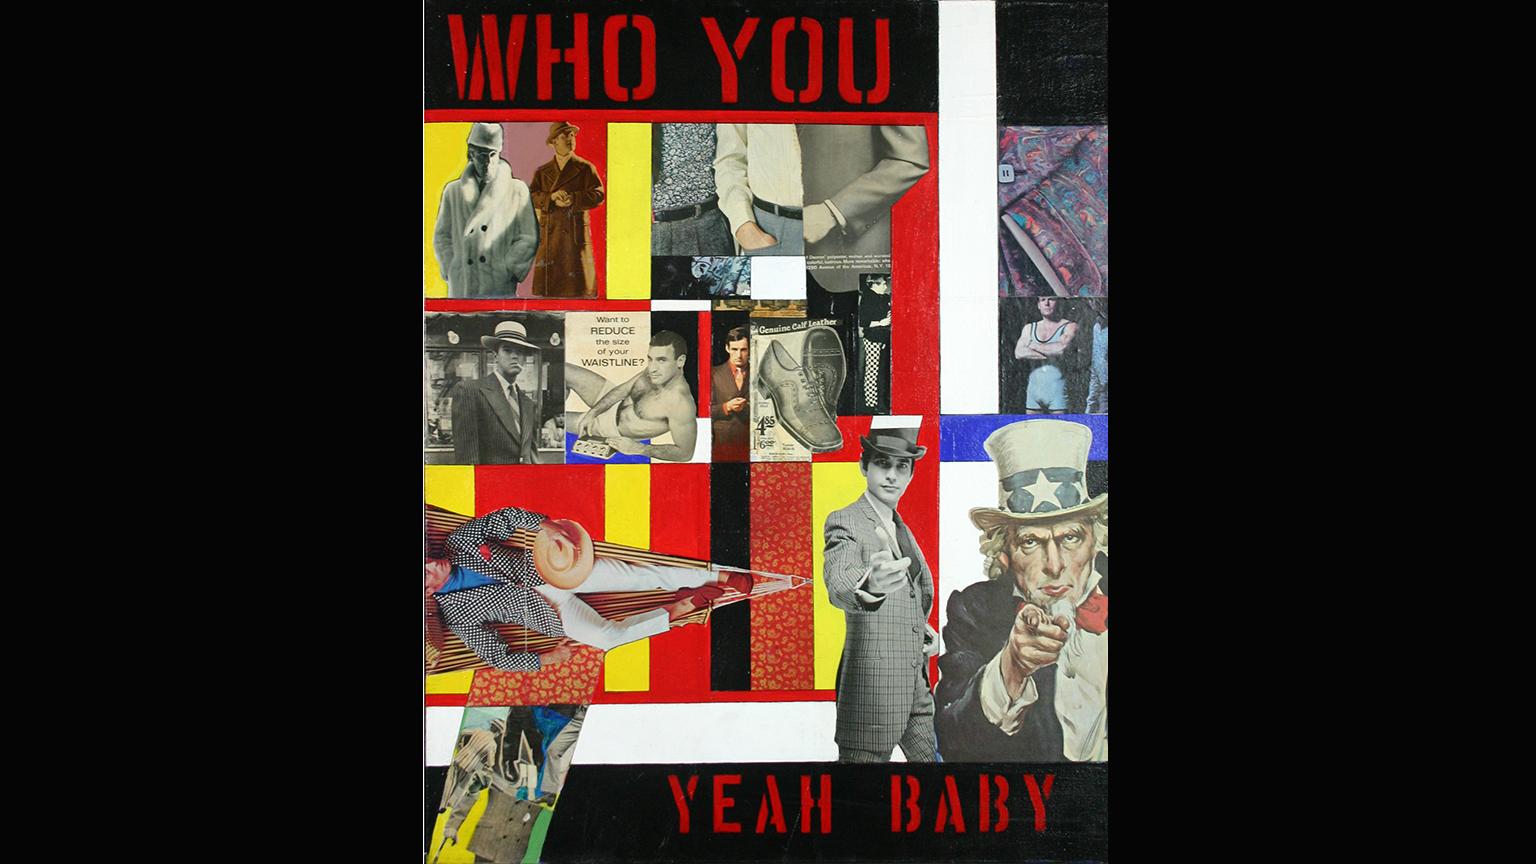 Ralph Arnold Who You/Yeah Baby c. 1968  DePaul Art Museum.  Reproduced with permission  from The Pauls Foundation 